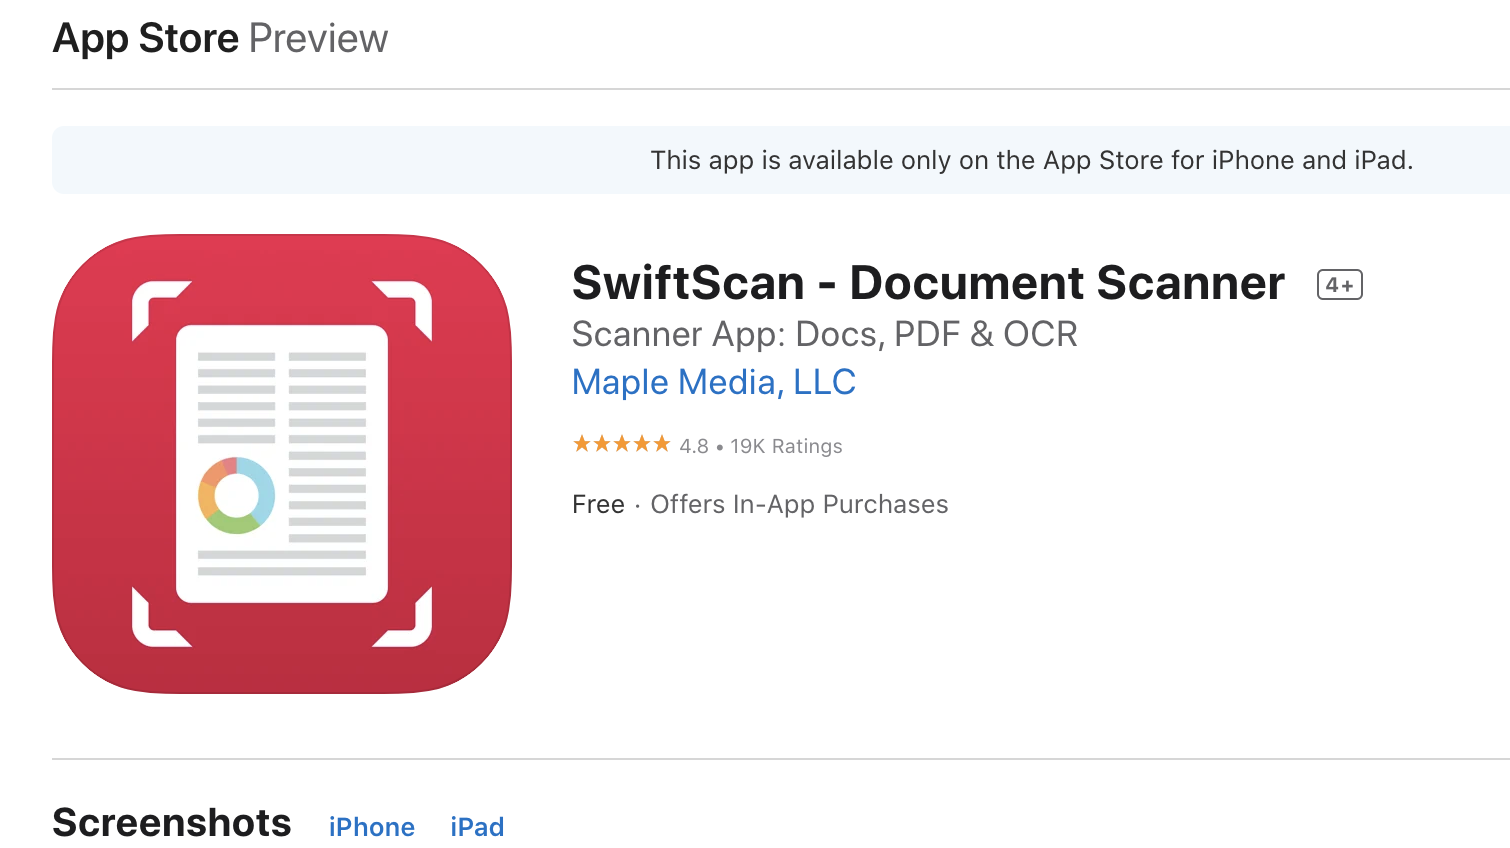 SwiftScan in the App Store